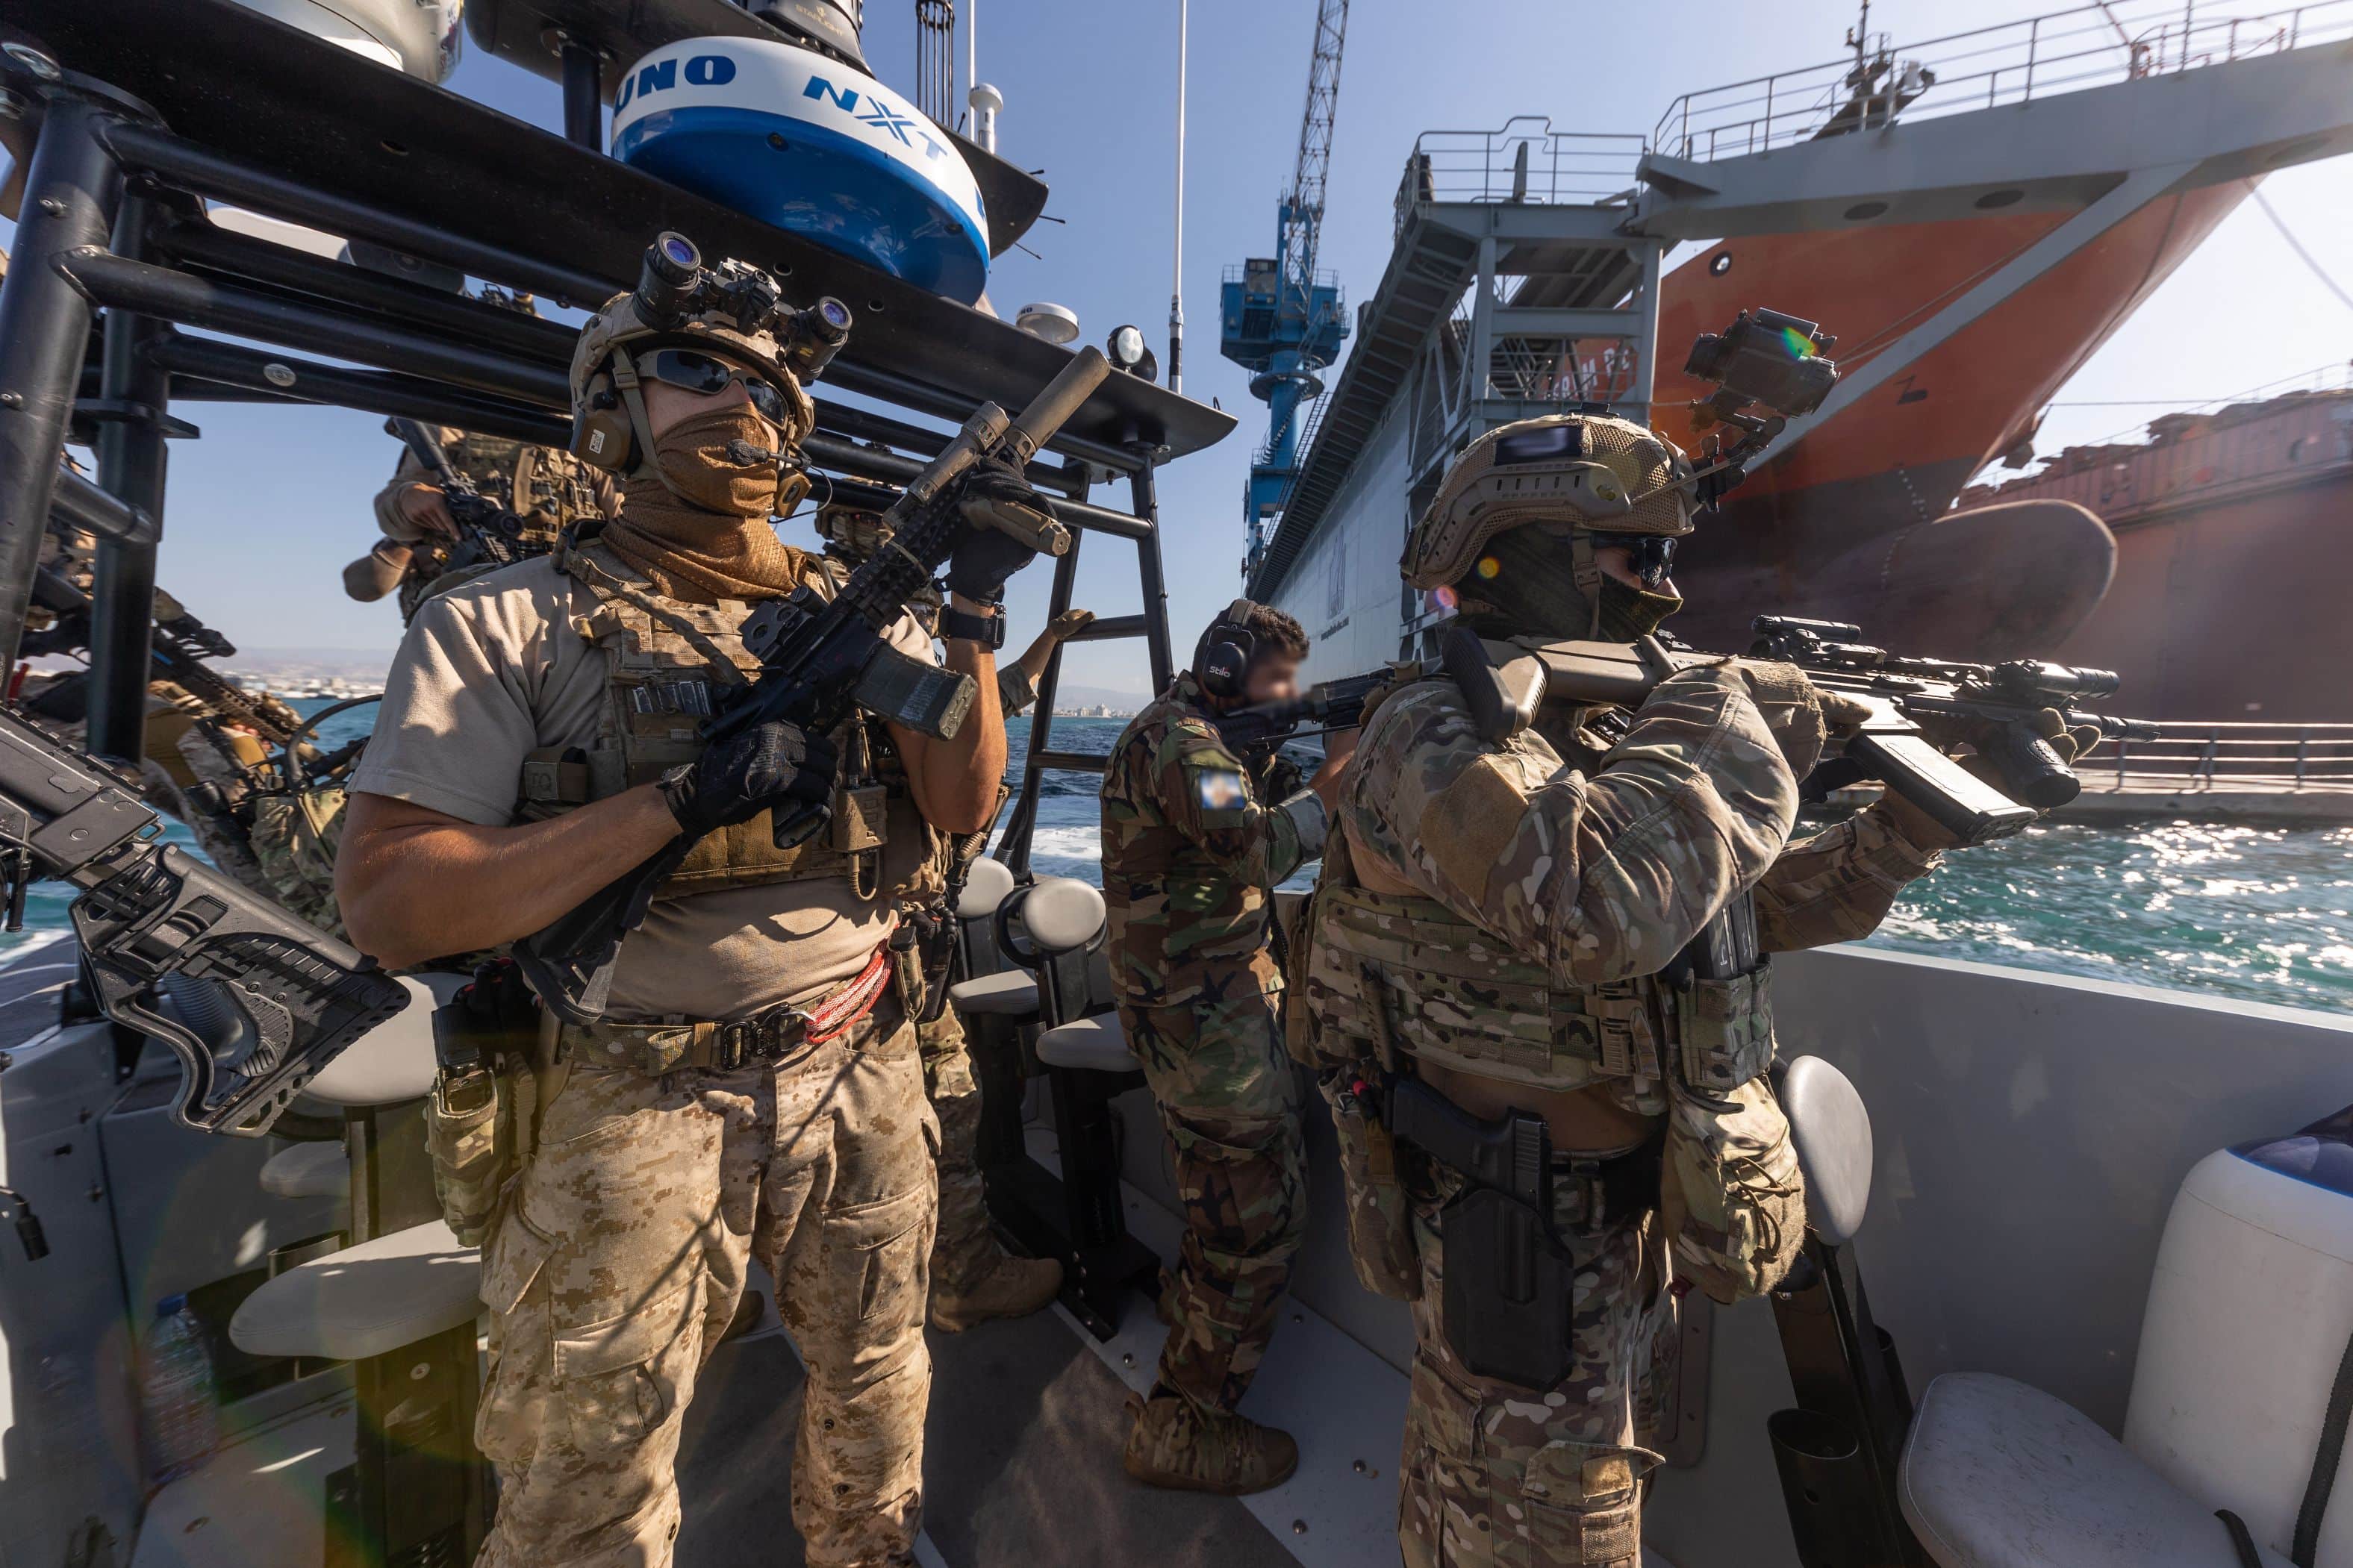 Cypriot Underwater Demolition Team (MYK) and members of US Naval Special Warfare Task Unit Europe (NSWTU-E) prepare to conduct maritime Visit, Board, Search and Seizure (VBSS) training in Cyprus